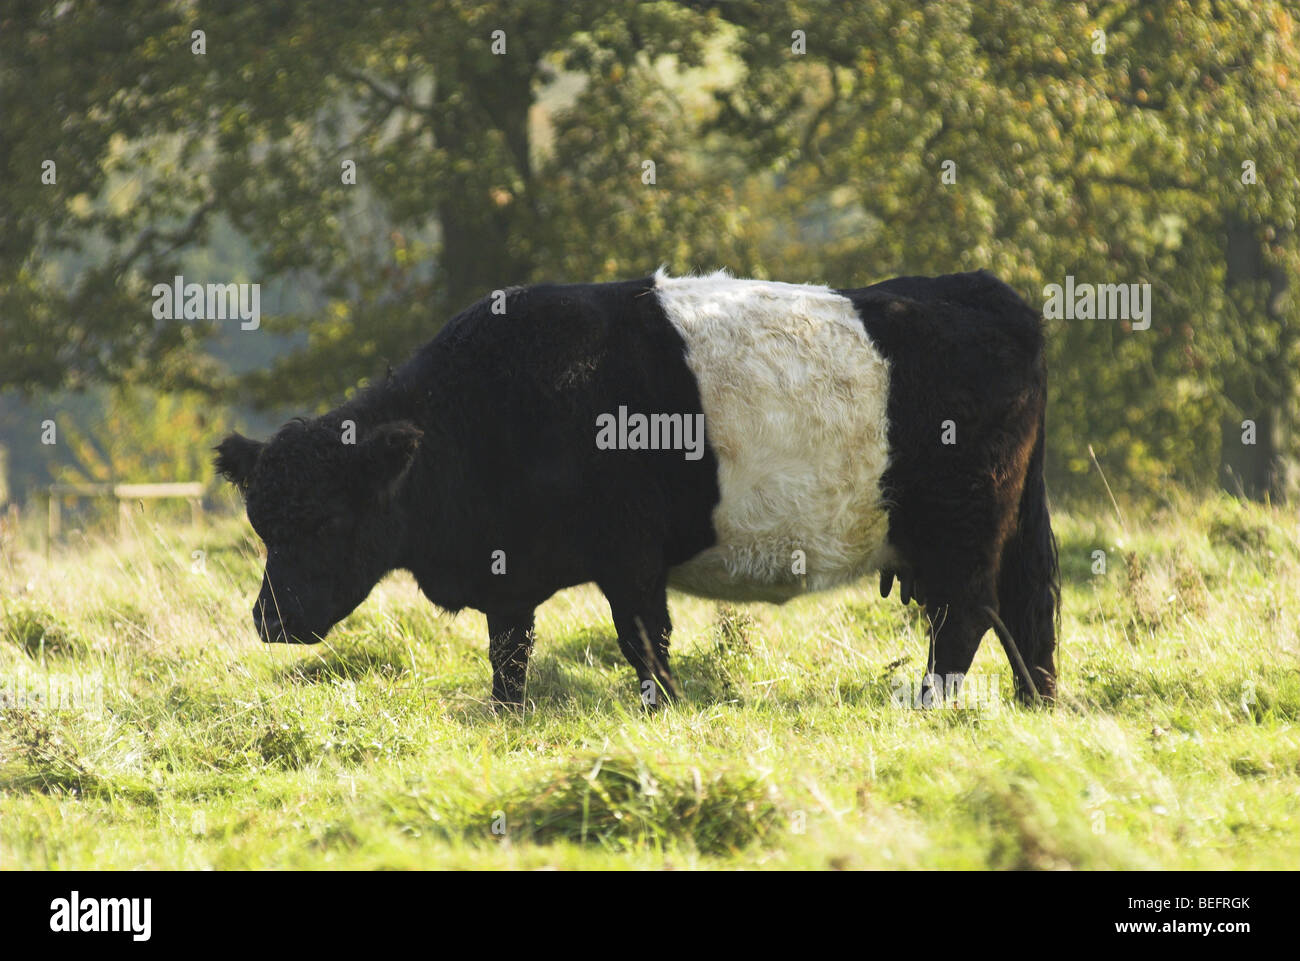 A Belted Galloway cow grazing Stock Photo